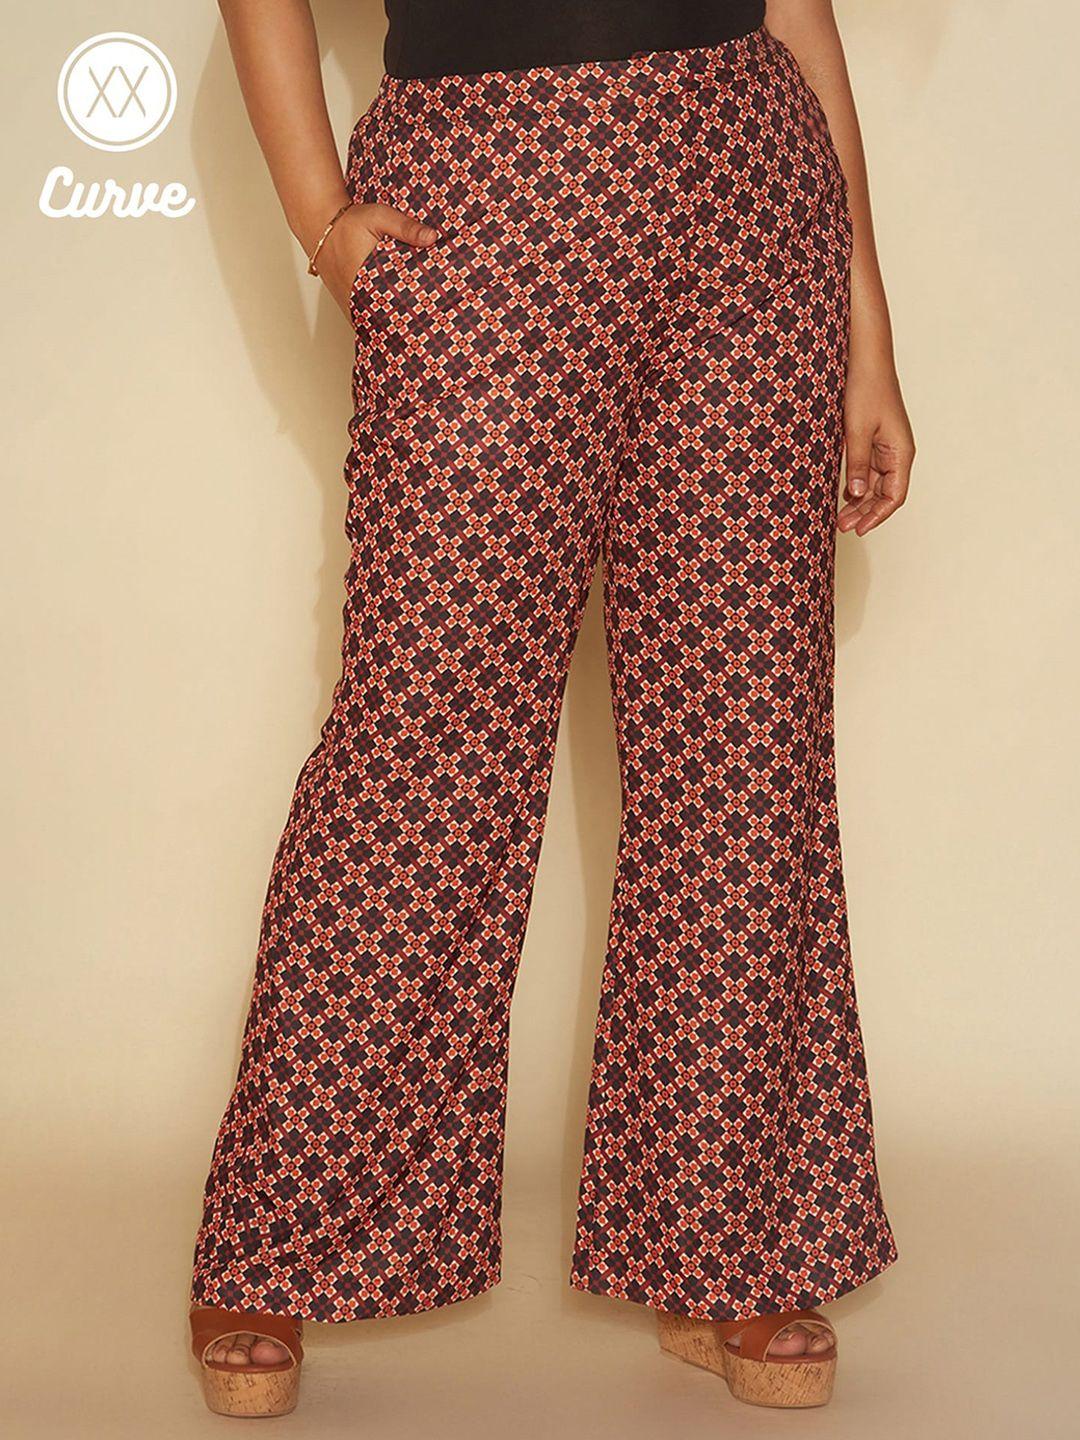 20dresses women plus size maroon & white geometric printed high-rise parallel trousers